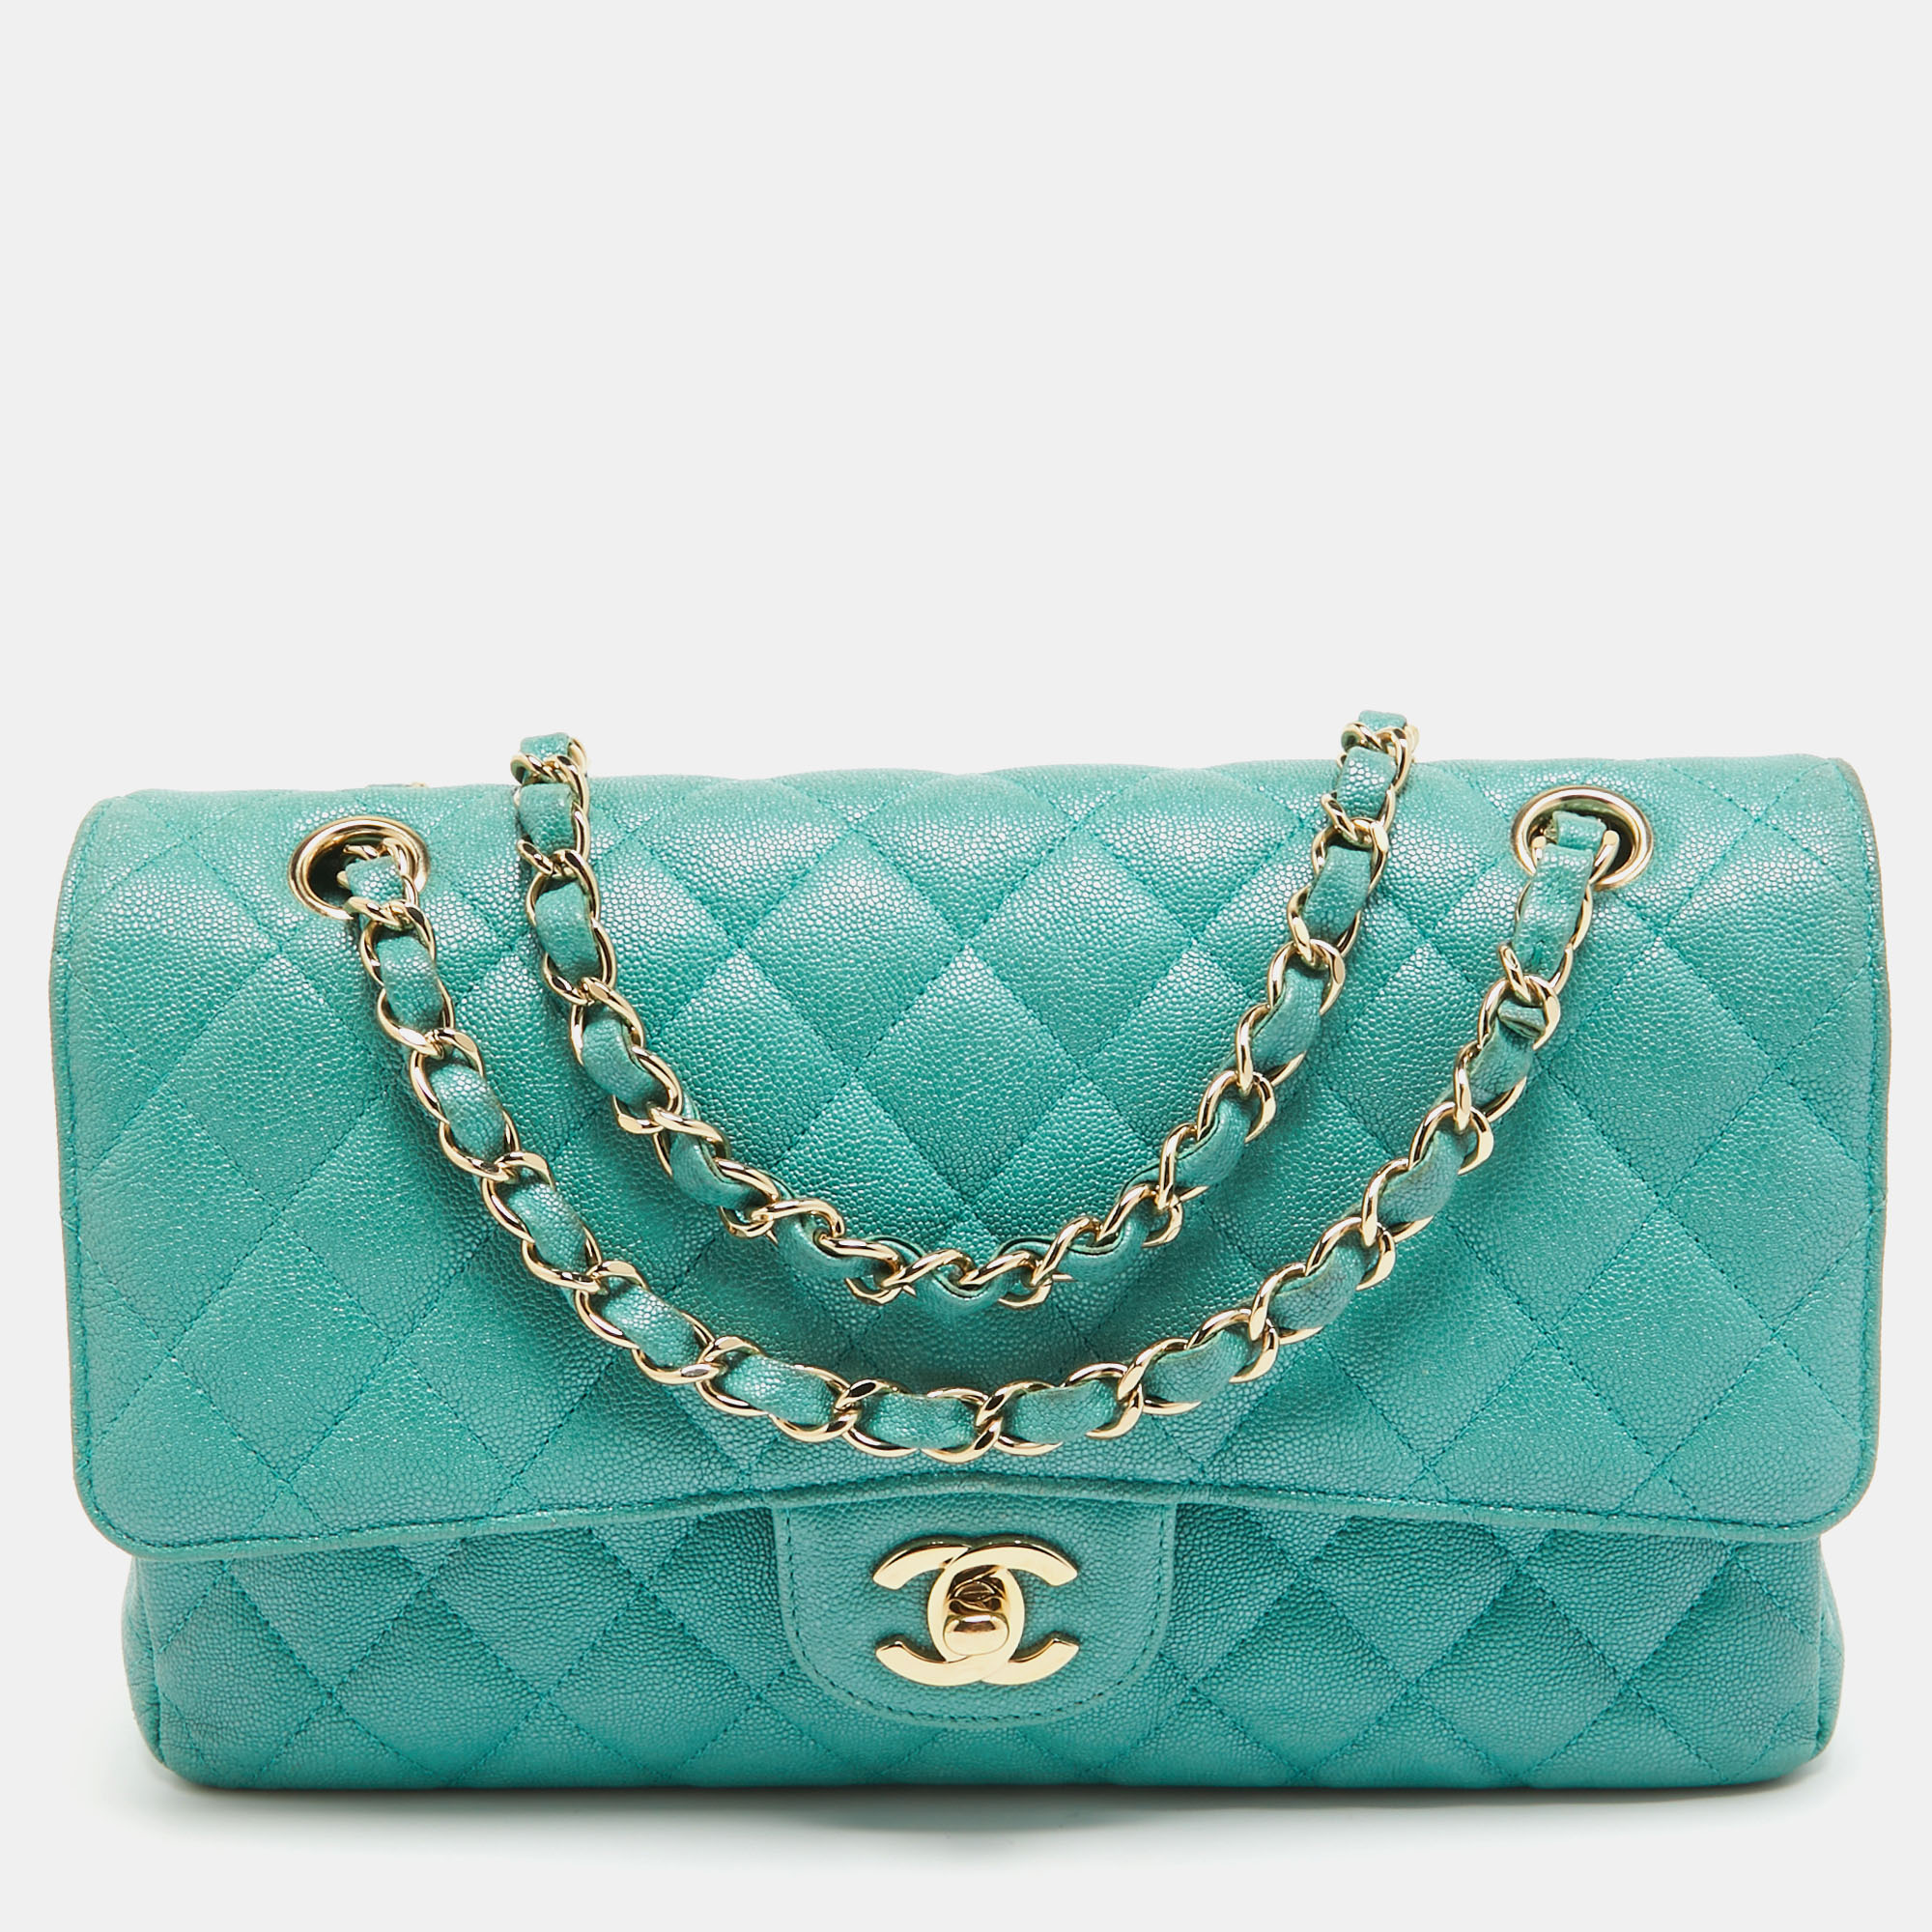 Chanel green quilted caviar leather medium classic double flap bag